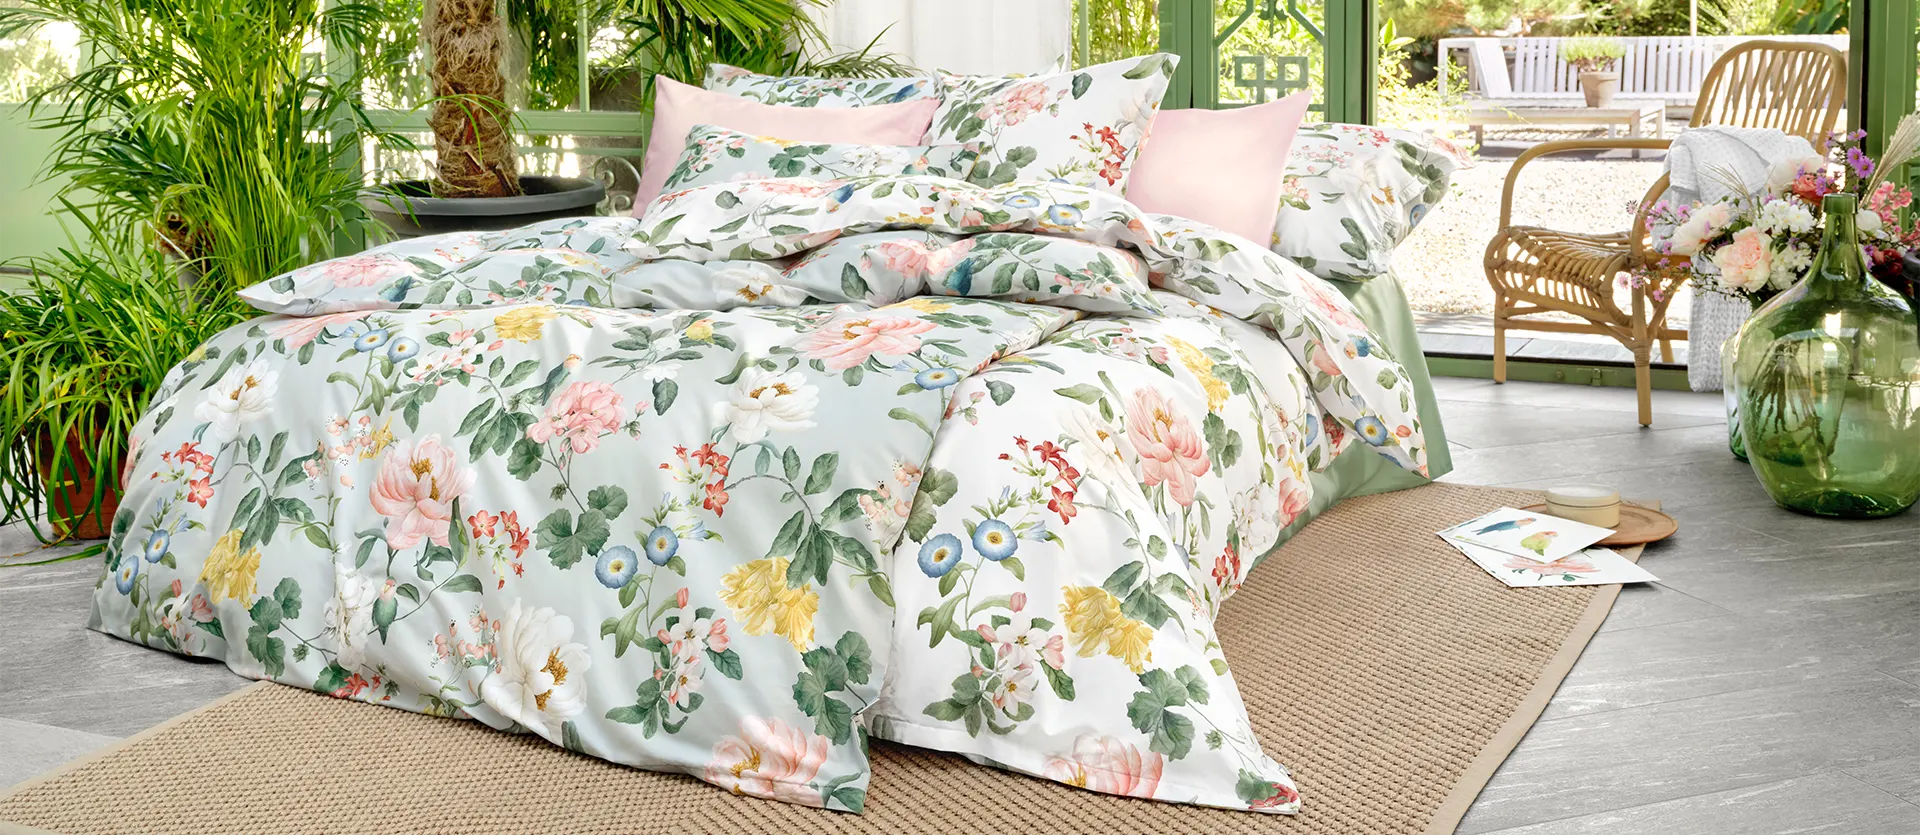 Bed linen to feel good